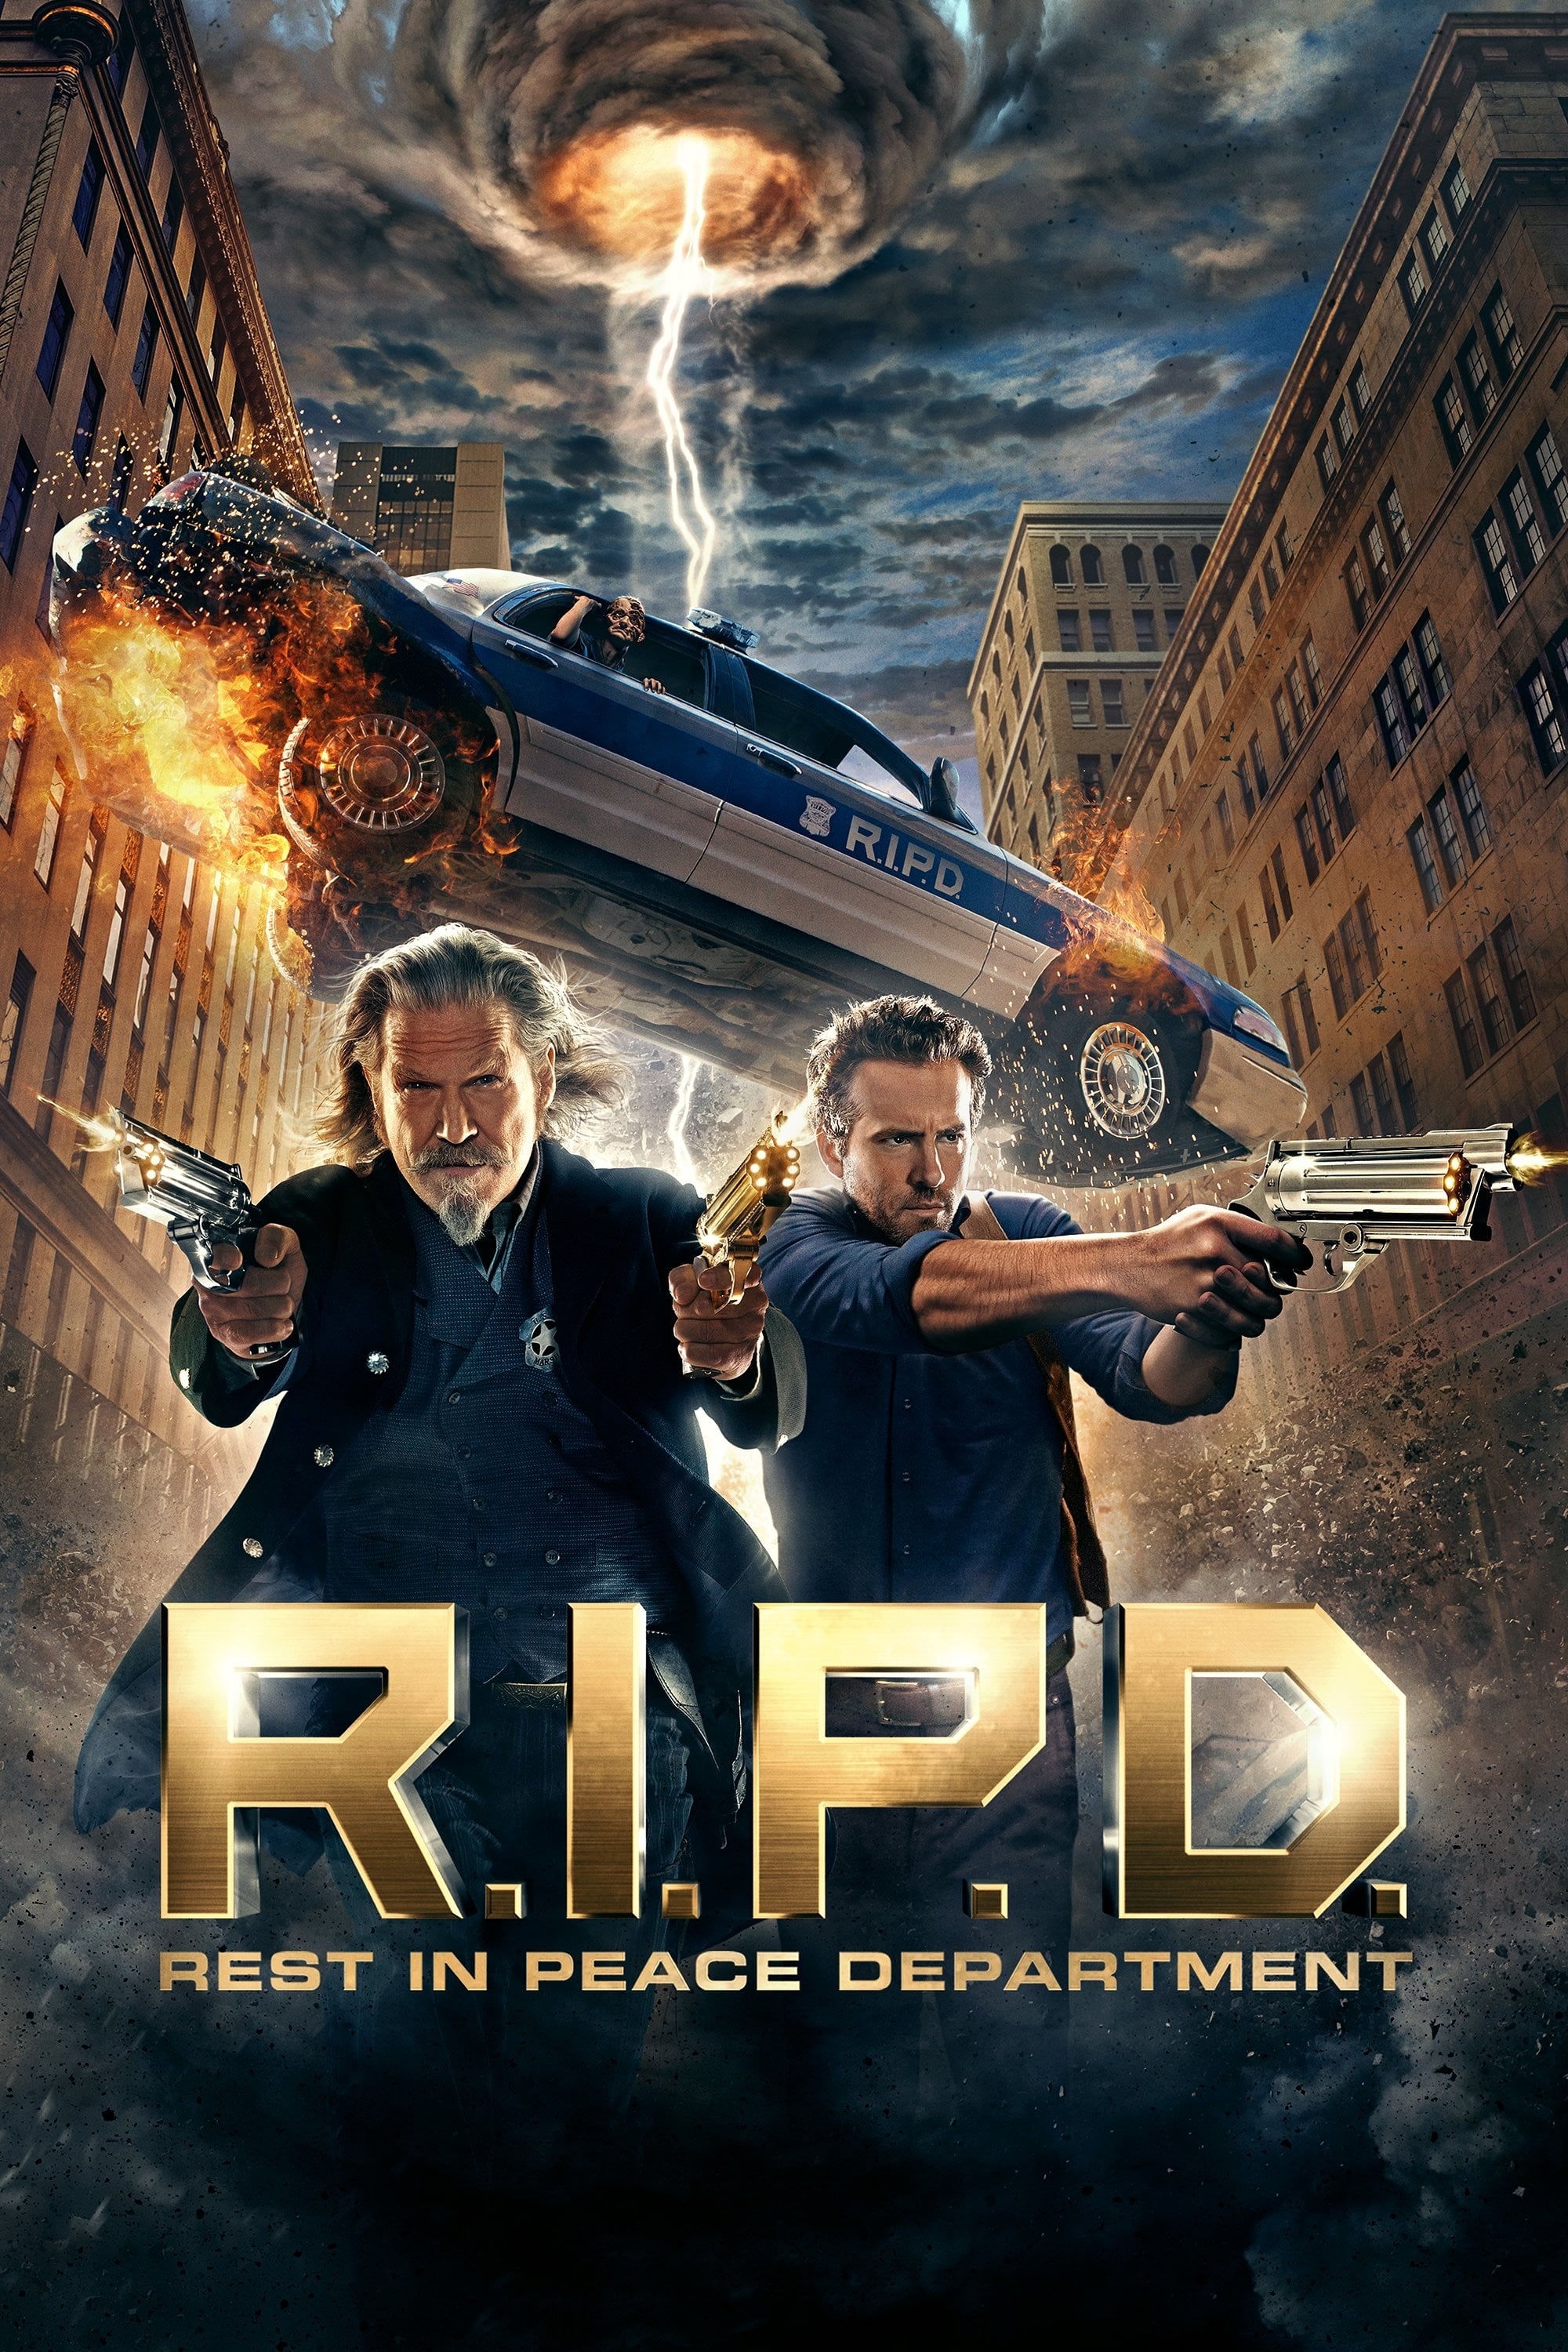 R.I.P.D. REST IN PEACE DEPARTMENT